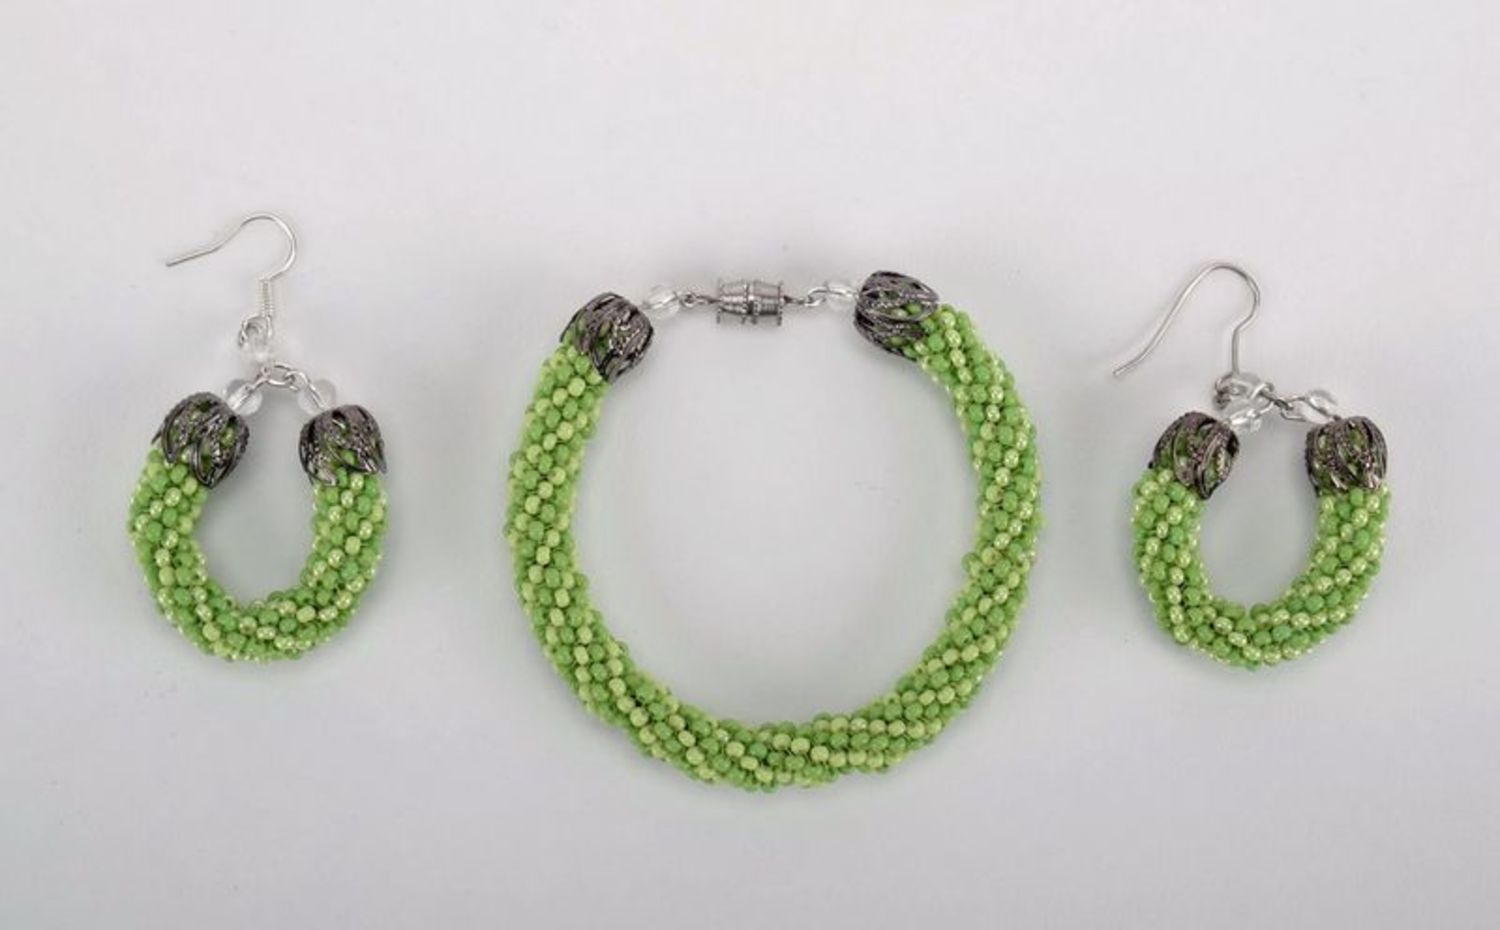 Earrings and bracelet made from green beads photo 2